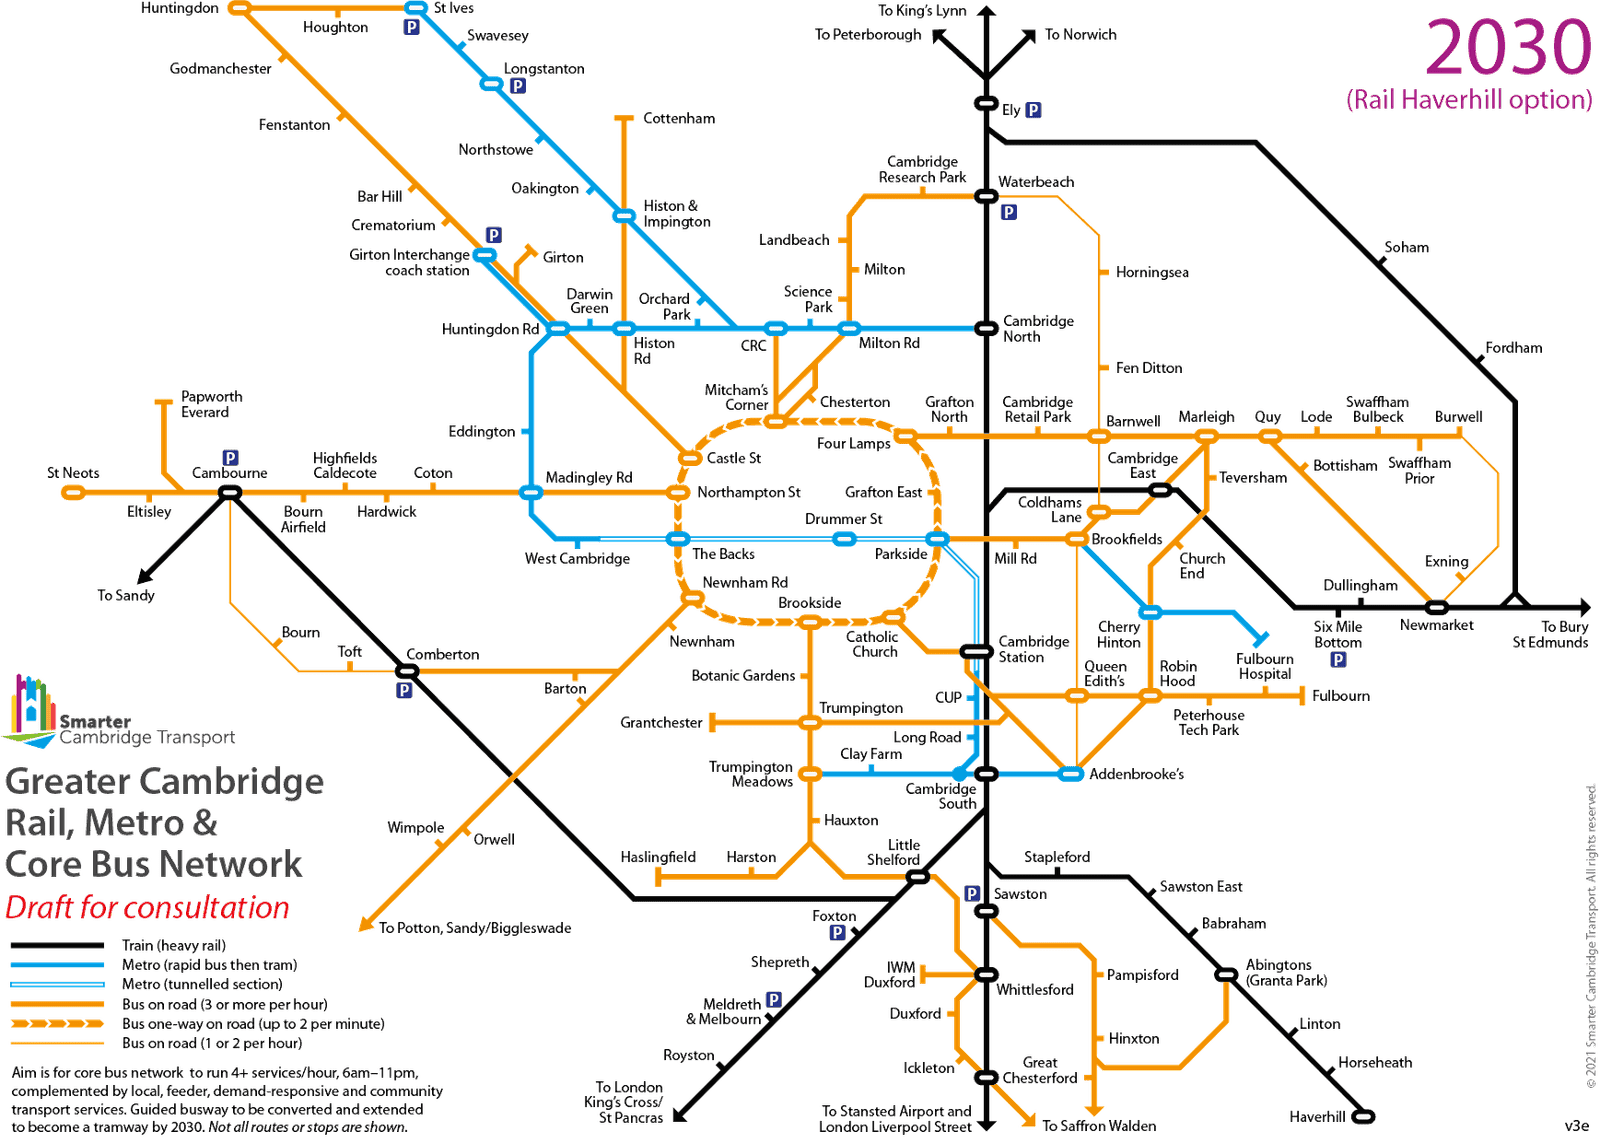 Schematic map of modified rail and bus network in Cambridge in 2030 with new rail and metro infrastructure (Haverhill linked by heavy rail)